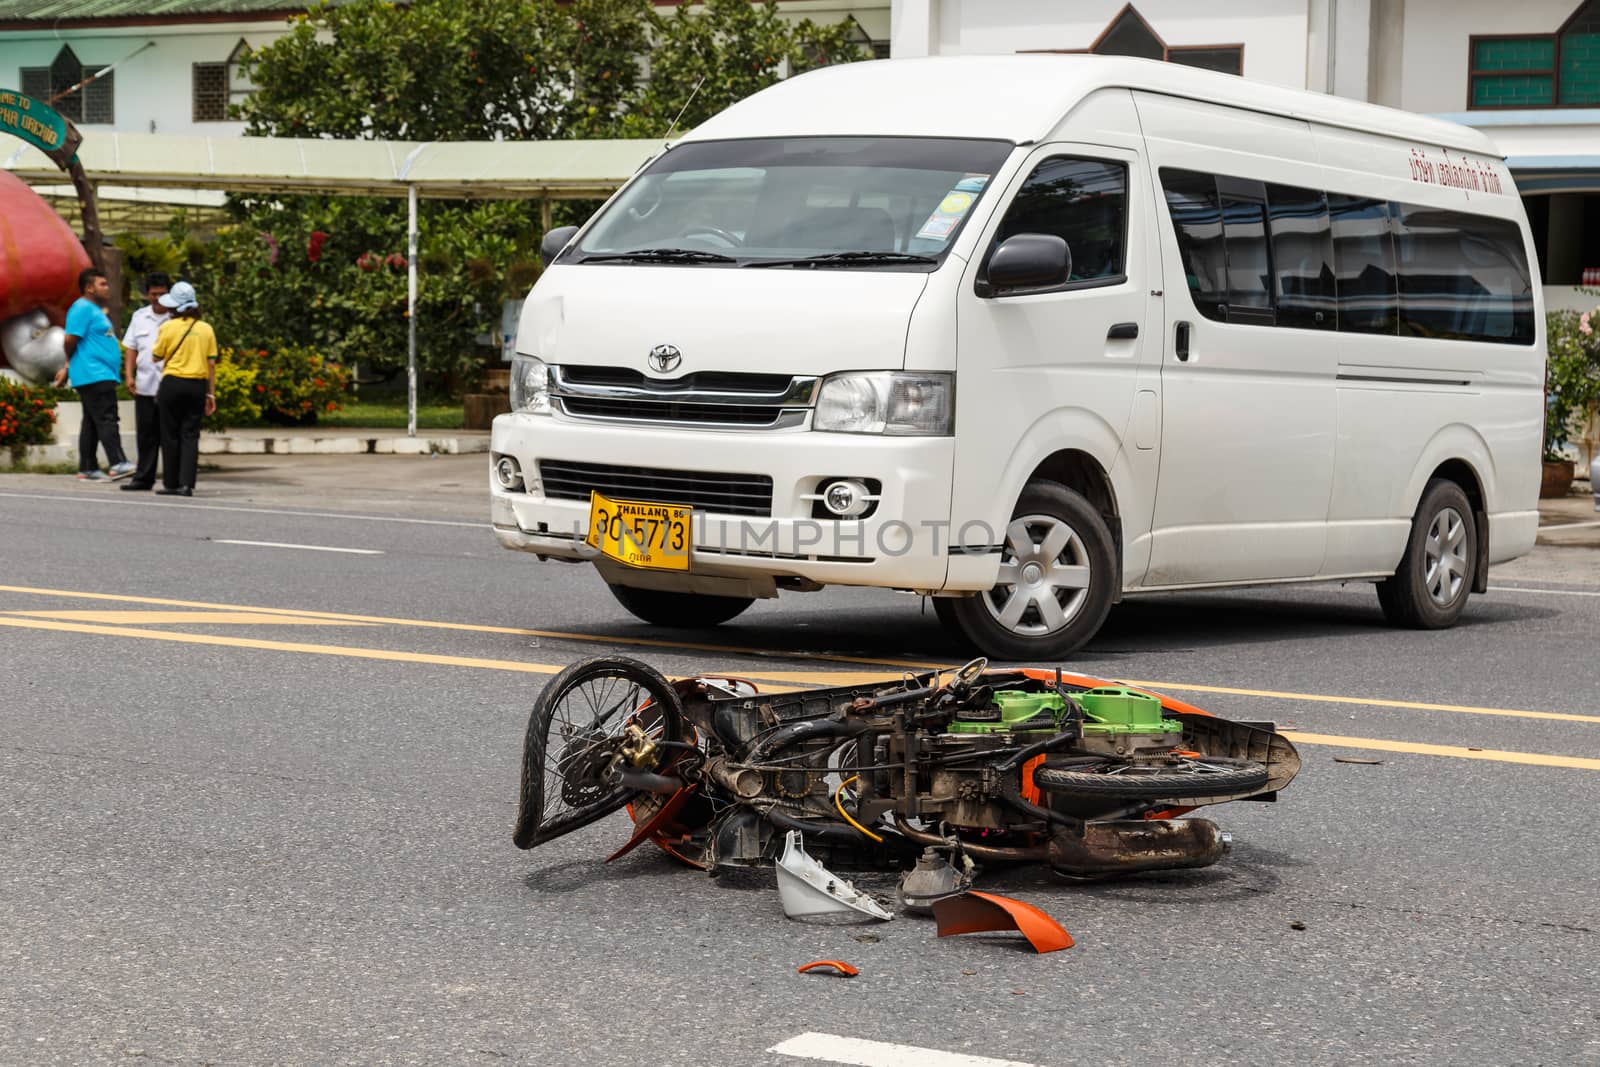 PHUKET, THAILAND - NOVEMBER 3 : Van accident on the road and crashed with motorcycle which causing the rider serious injury. November 3, 2014 in Phuket Thailand.